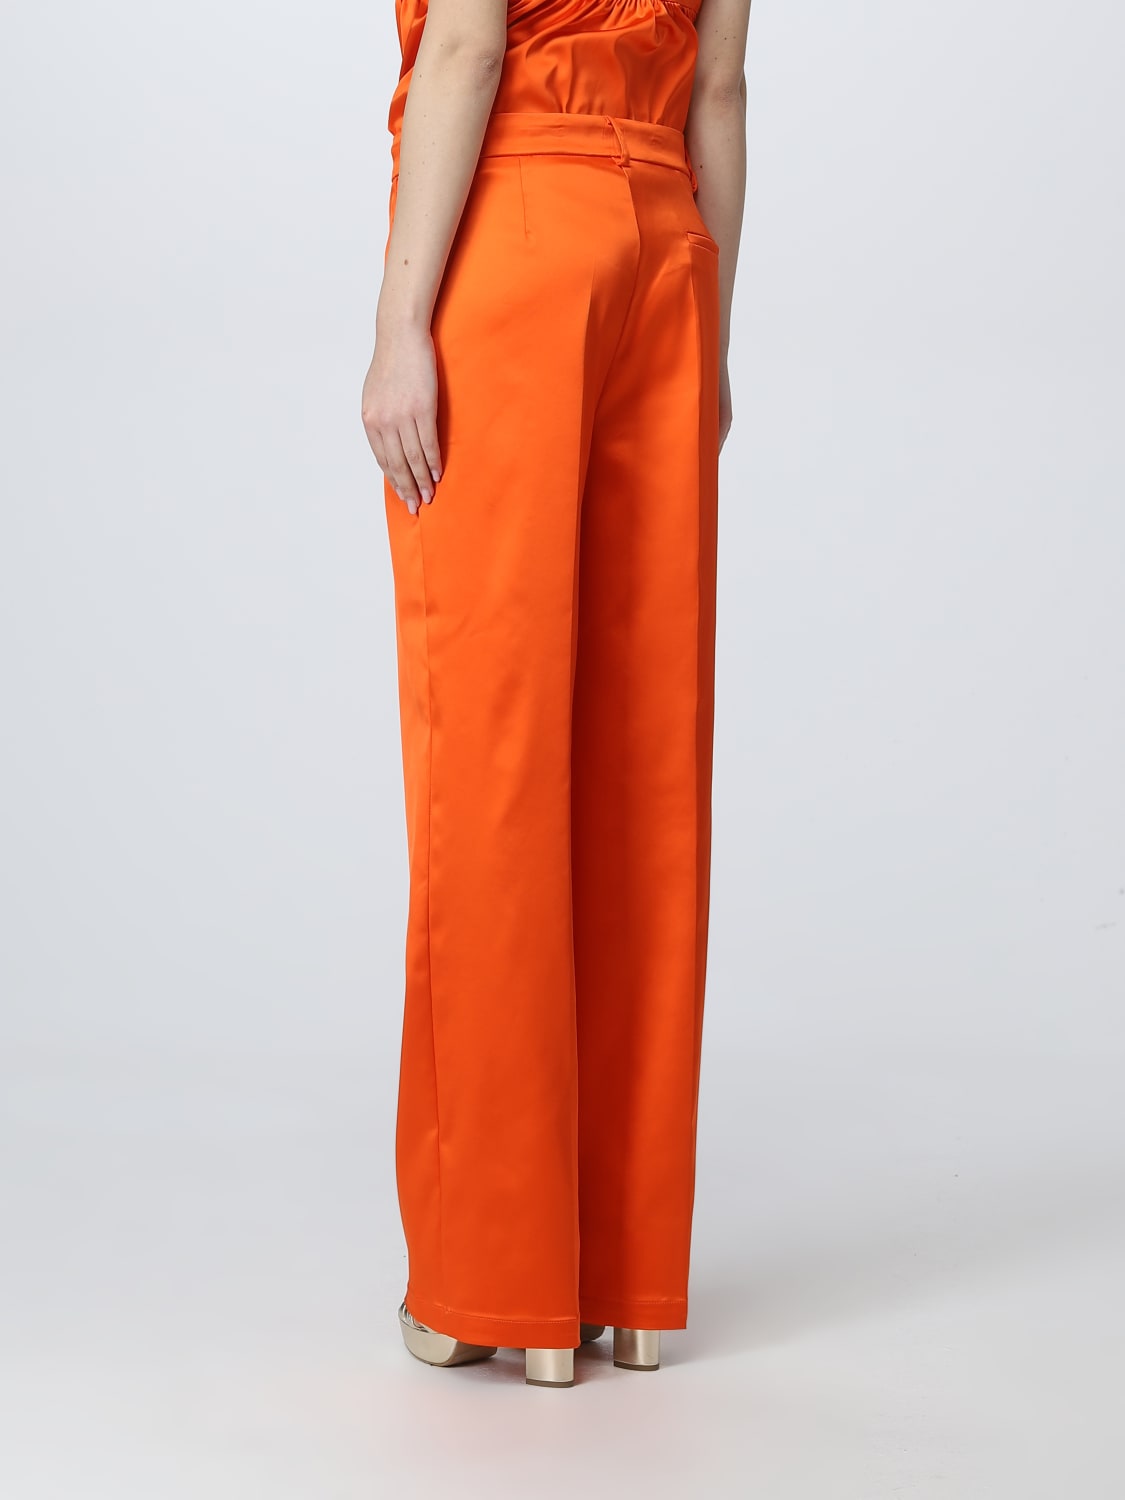 Semicouture Outlet: pants for woman - Orange  Semicouture pants Y3SQ10  online at